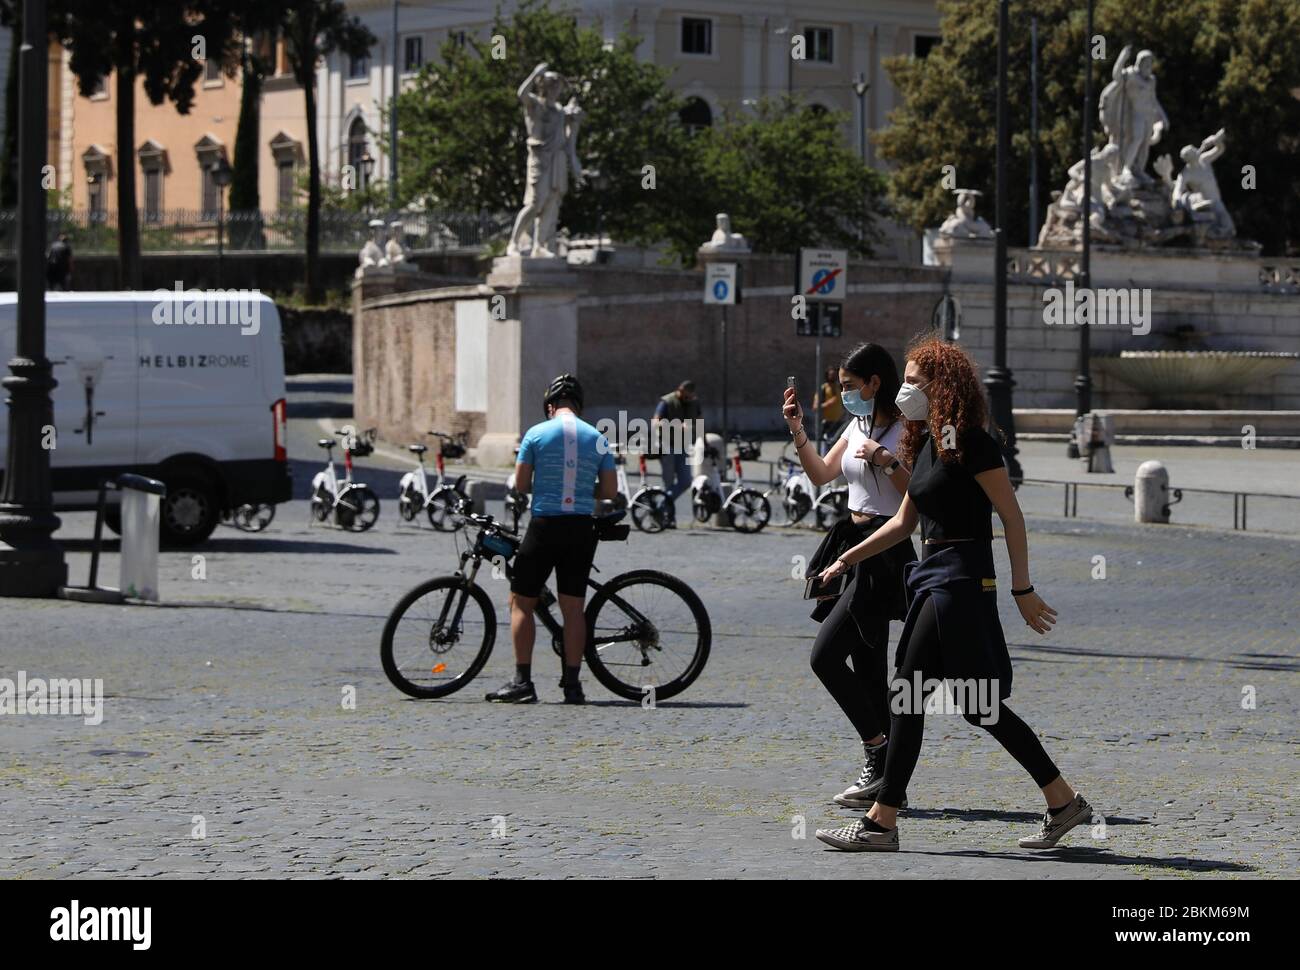 Rome, Italy. 4th May, 2020. Two women wearing face masks walk across the Piazza del Popolo in Rome, Italy, May 4, 2020. The coronavirus pandemic has claimed over 29,000 lives in Italy, bringing the total number of infections, fatalities and recoveries to 211,938 as of Monday, according to the latest data released by the country's Civil Protection Department. Italians enjoyed more liberties on Monday, as some restrictions on productive activities and personal movements were relaxed for the first time after almost eight weeks. Credit: Cheng Tingting/Xinhua/Alamy Live News Stock Photo